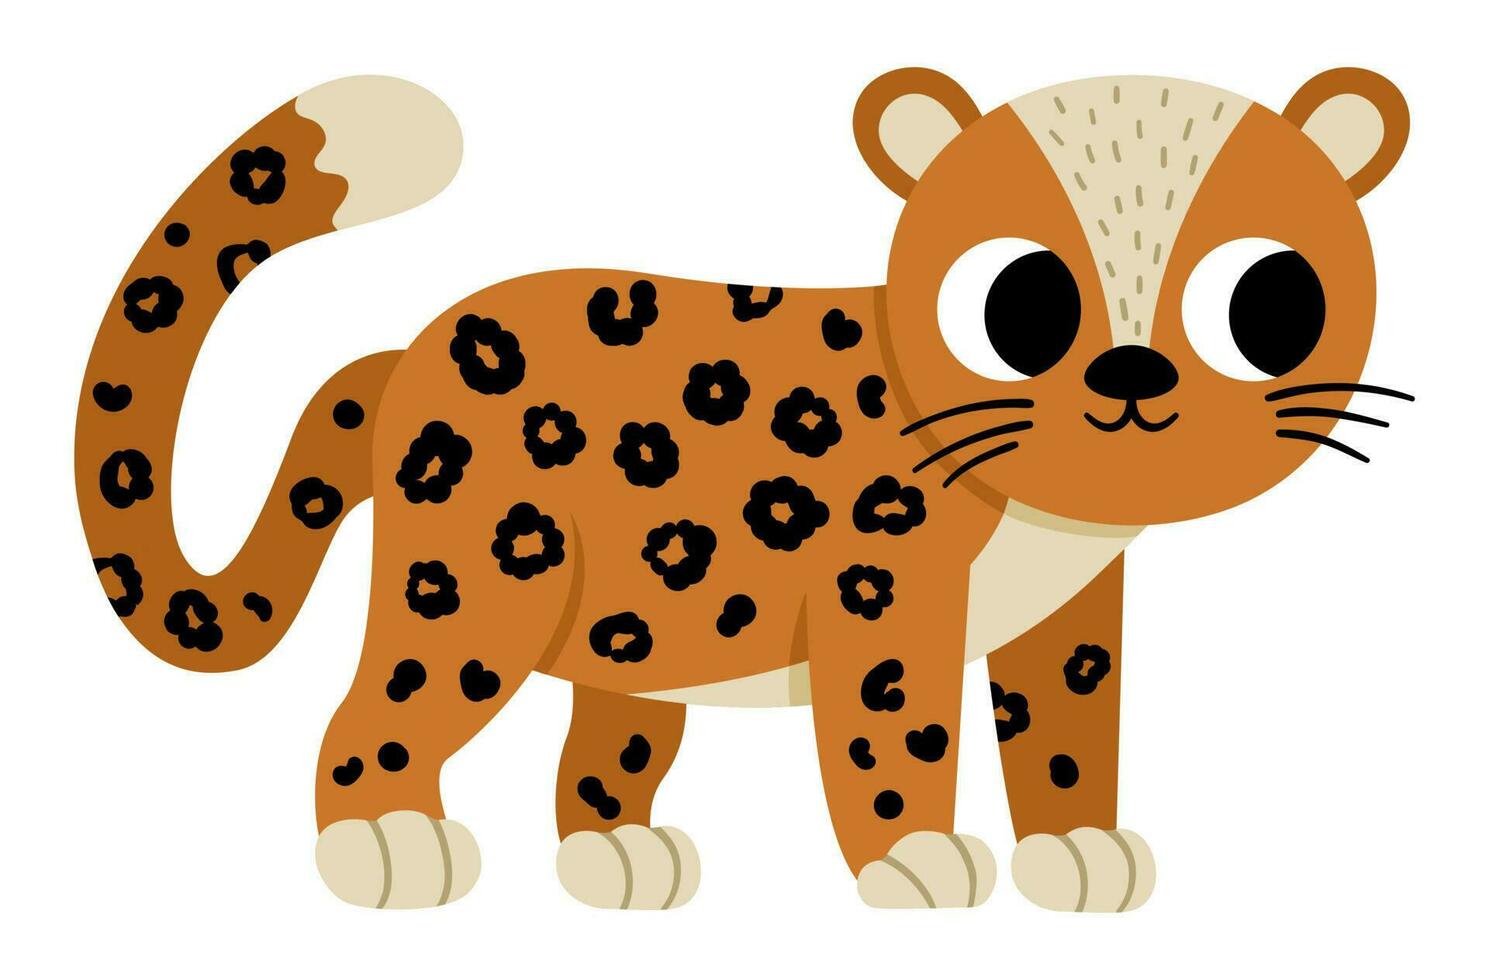 Vector amur leopard icon. Endangered species illustration. Cute extinct animal isolated on white background. Funny wild animal illustration for kids. Nature protection concept